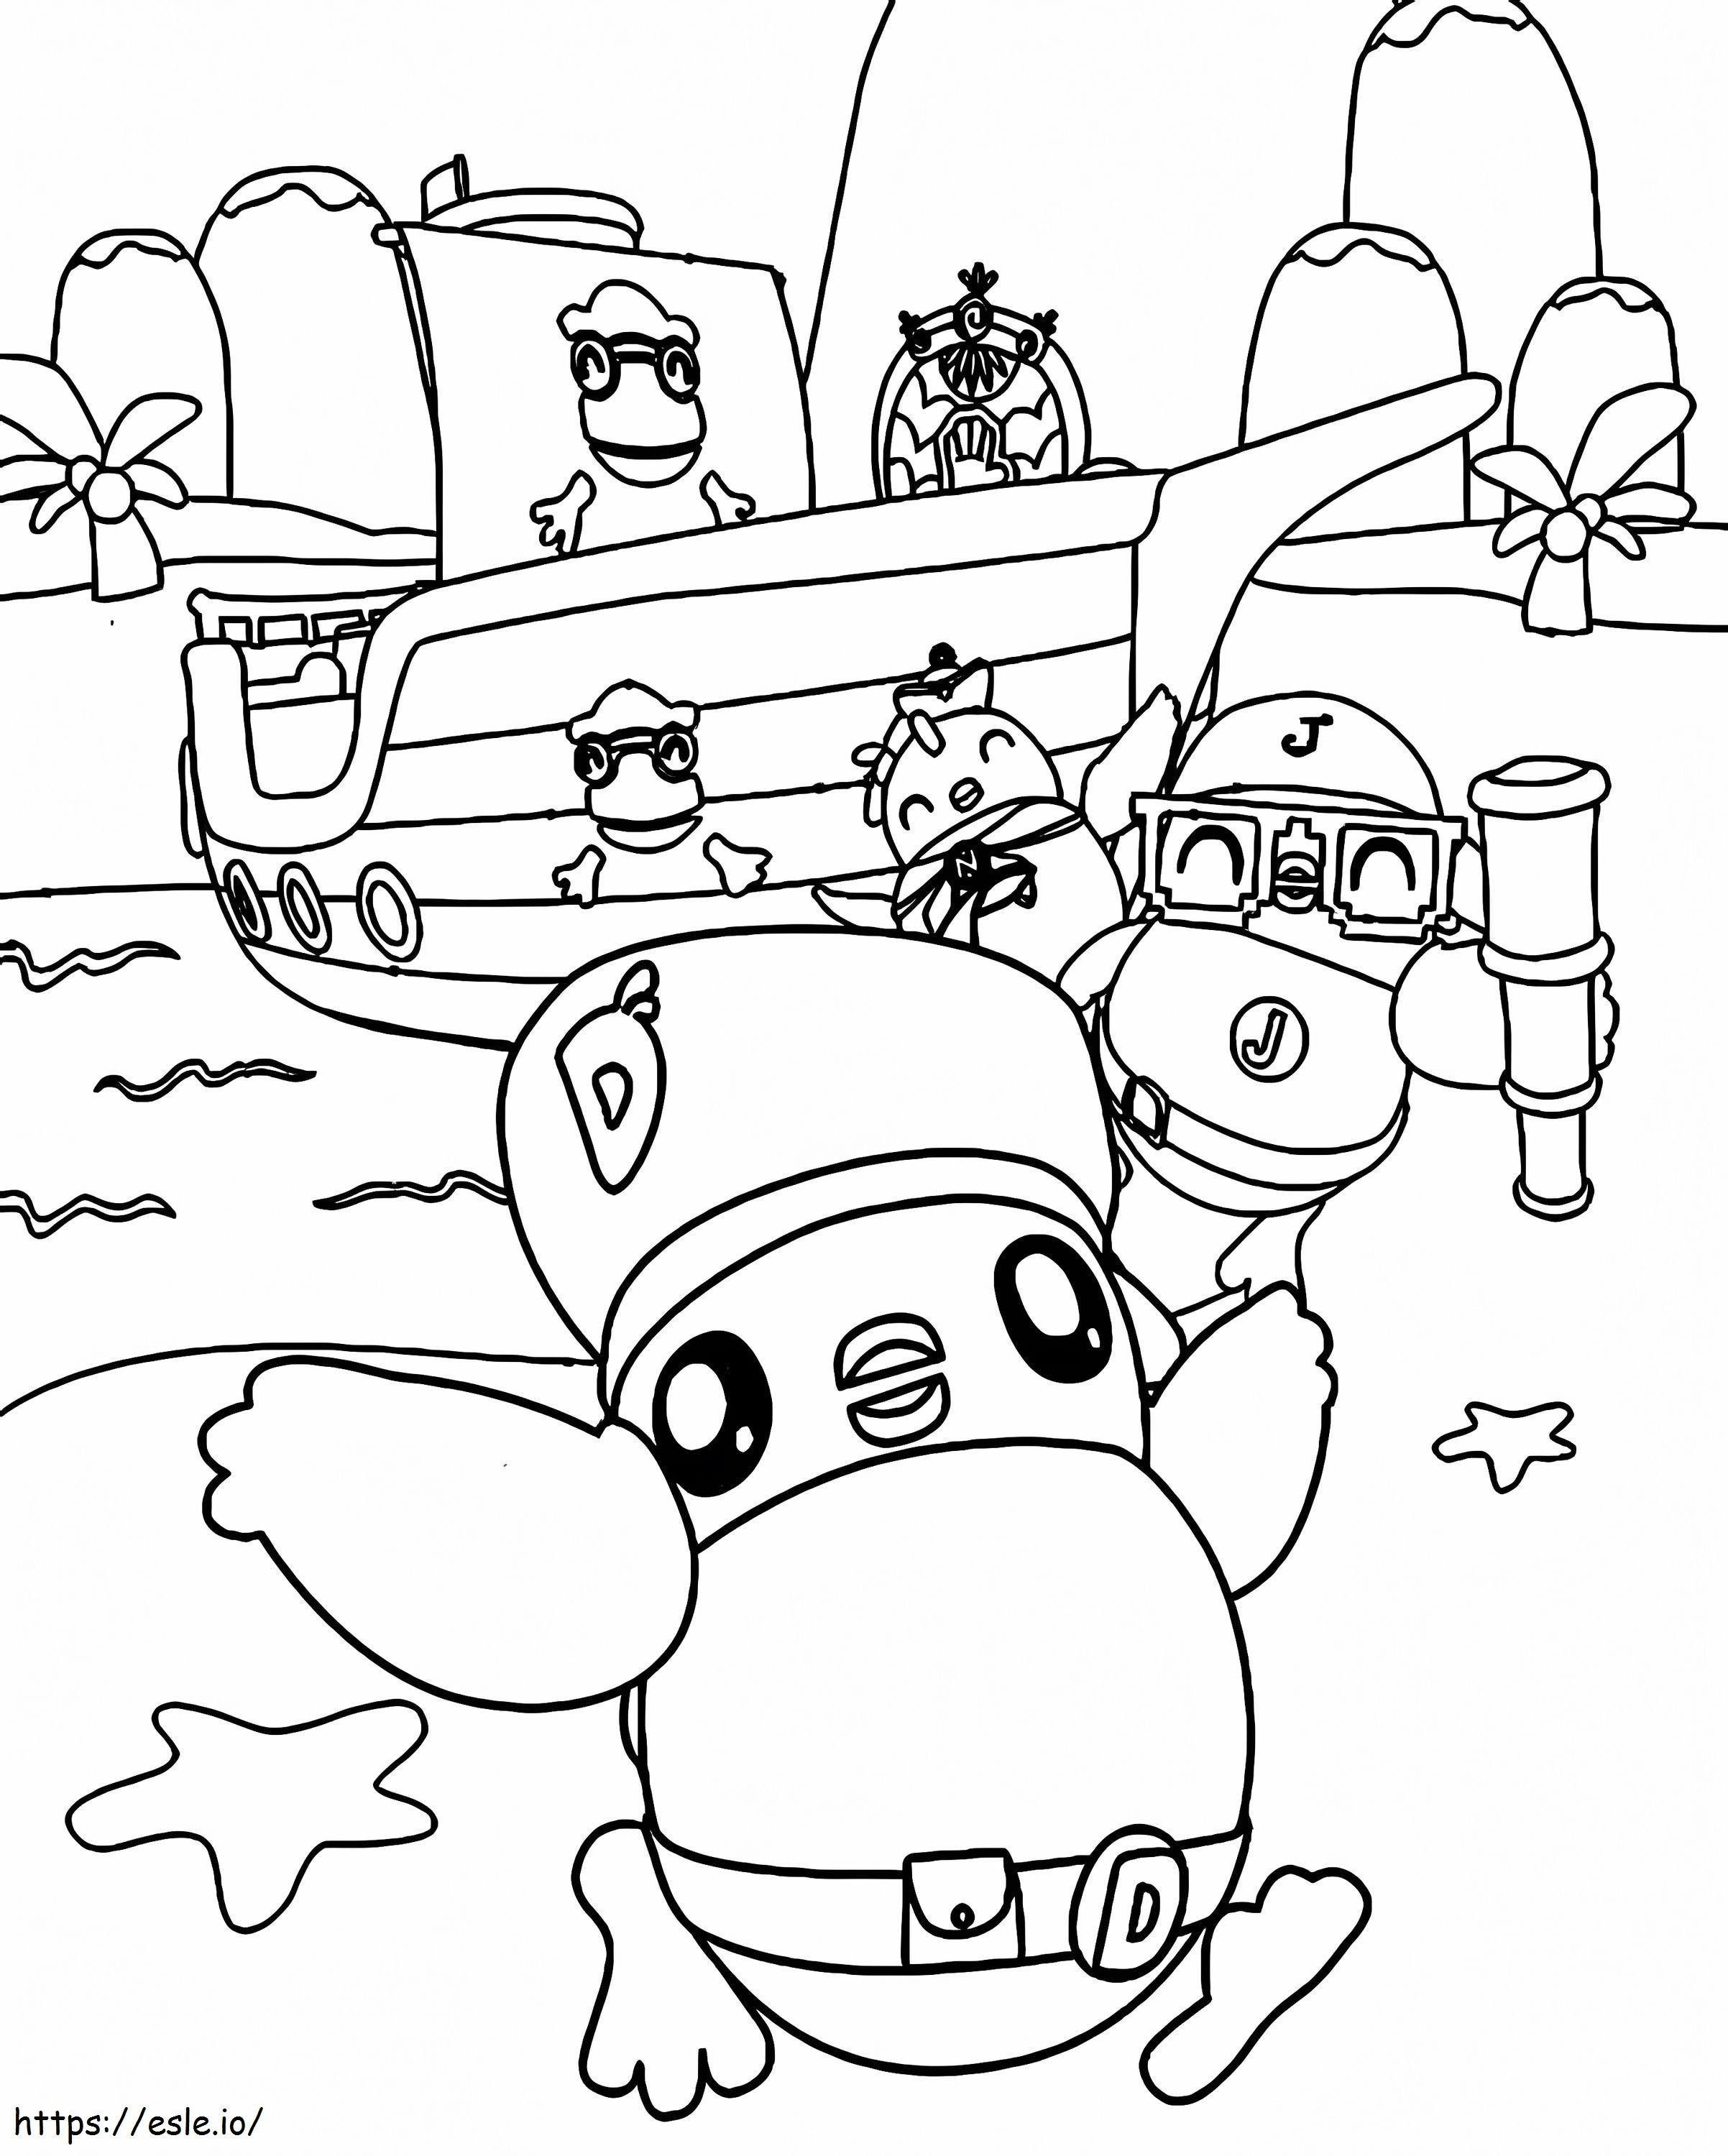 Didi Friends 3 coloring page